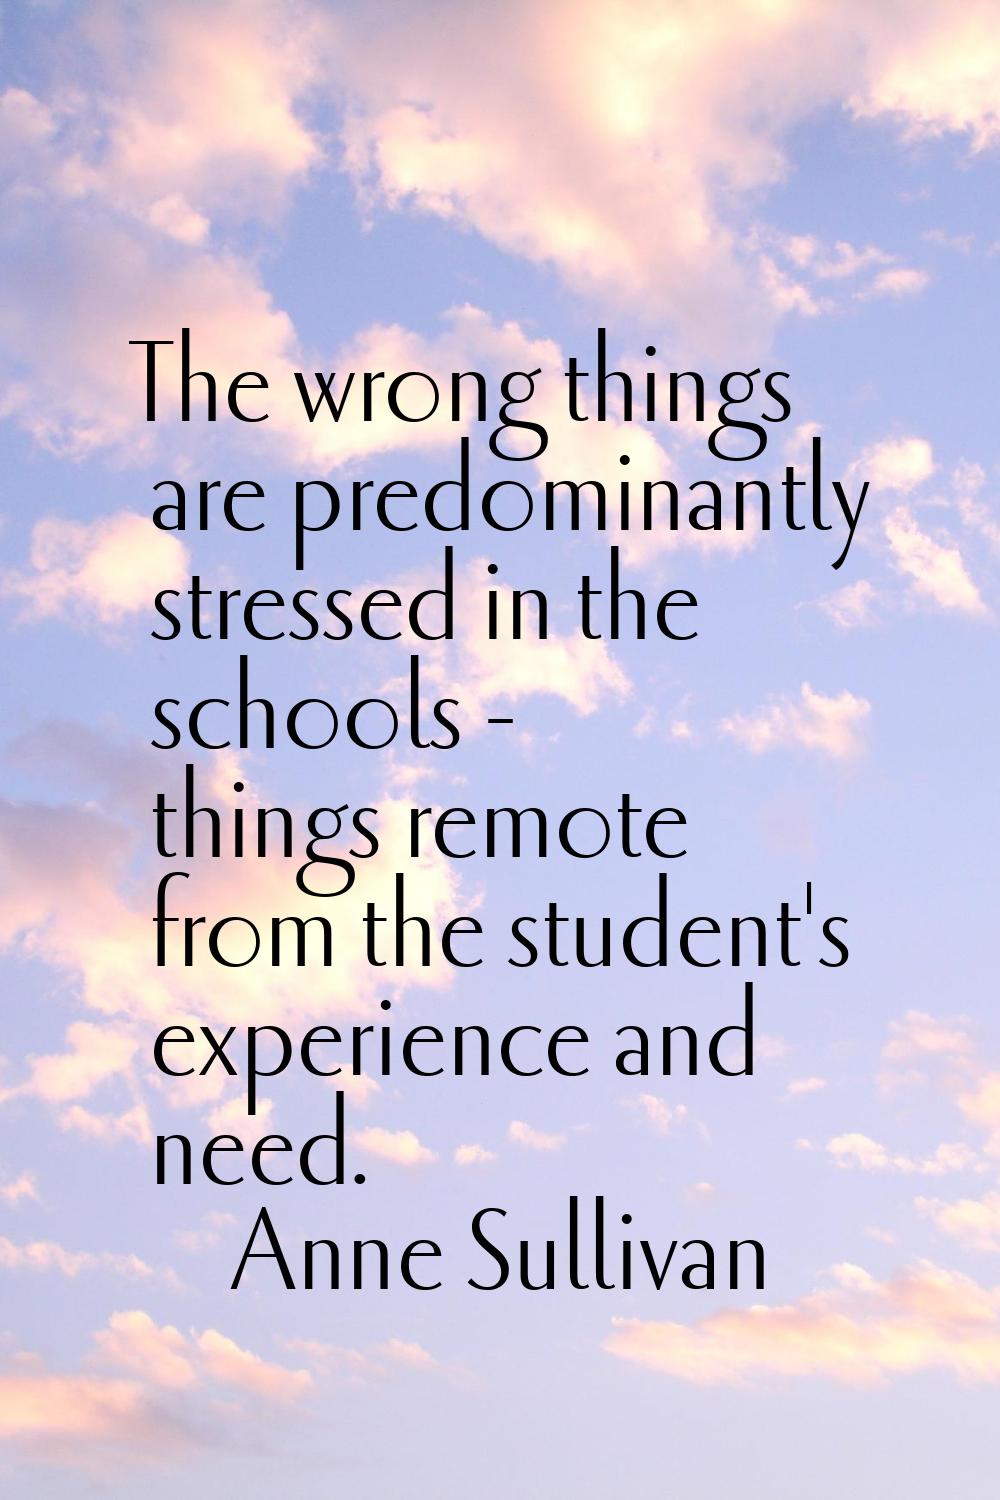 The wrong things are predominantly stressed in the schools - things remote from the student's exper